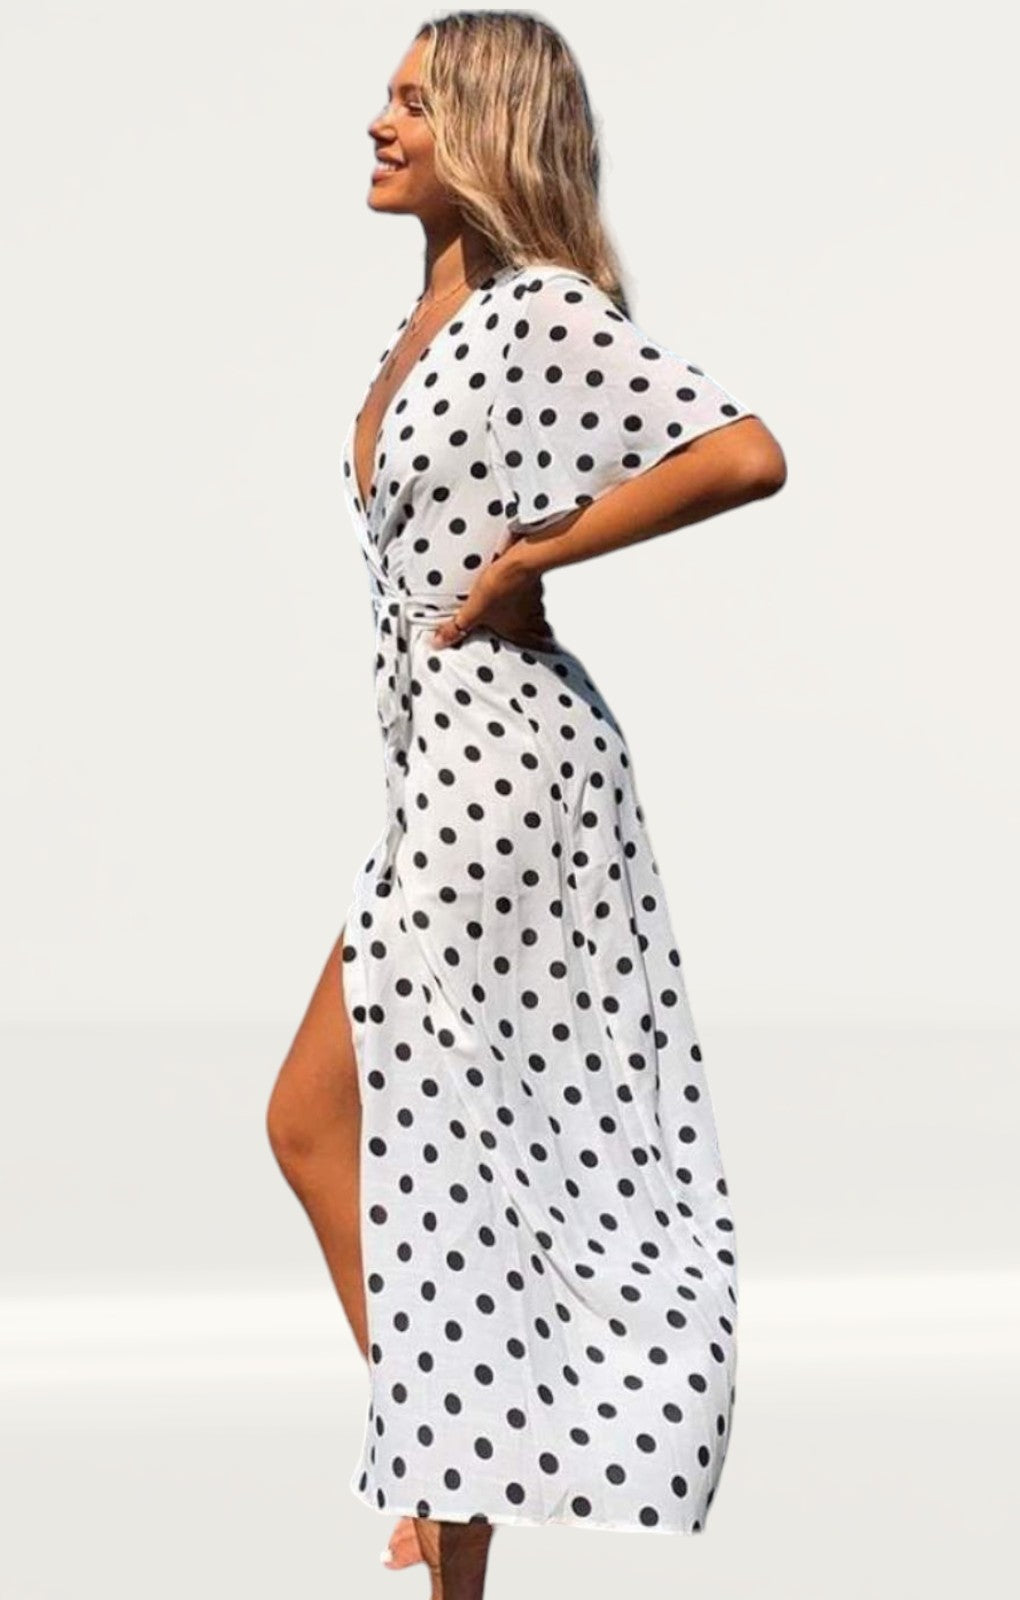 Runaway The Label Holstein Wrap Dress product image